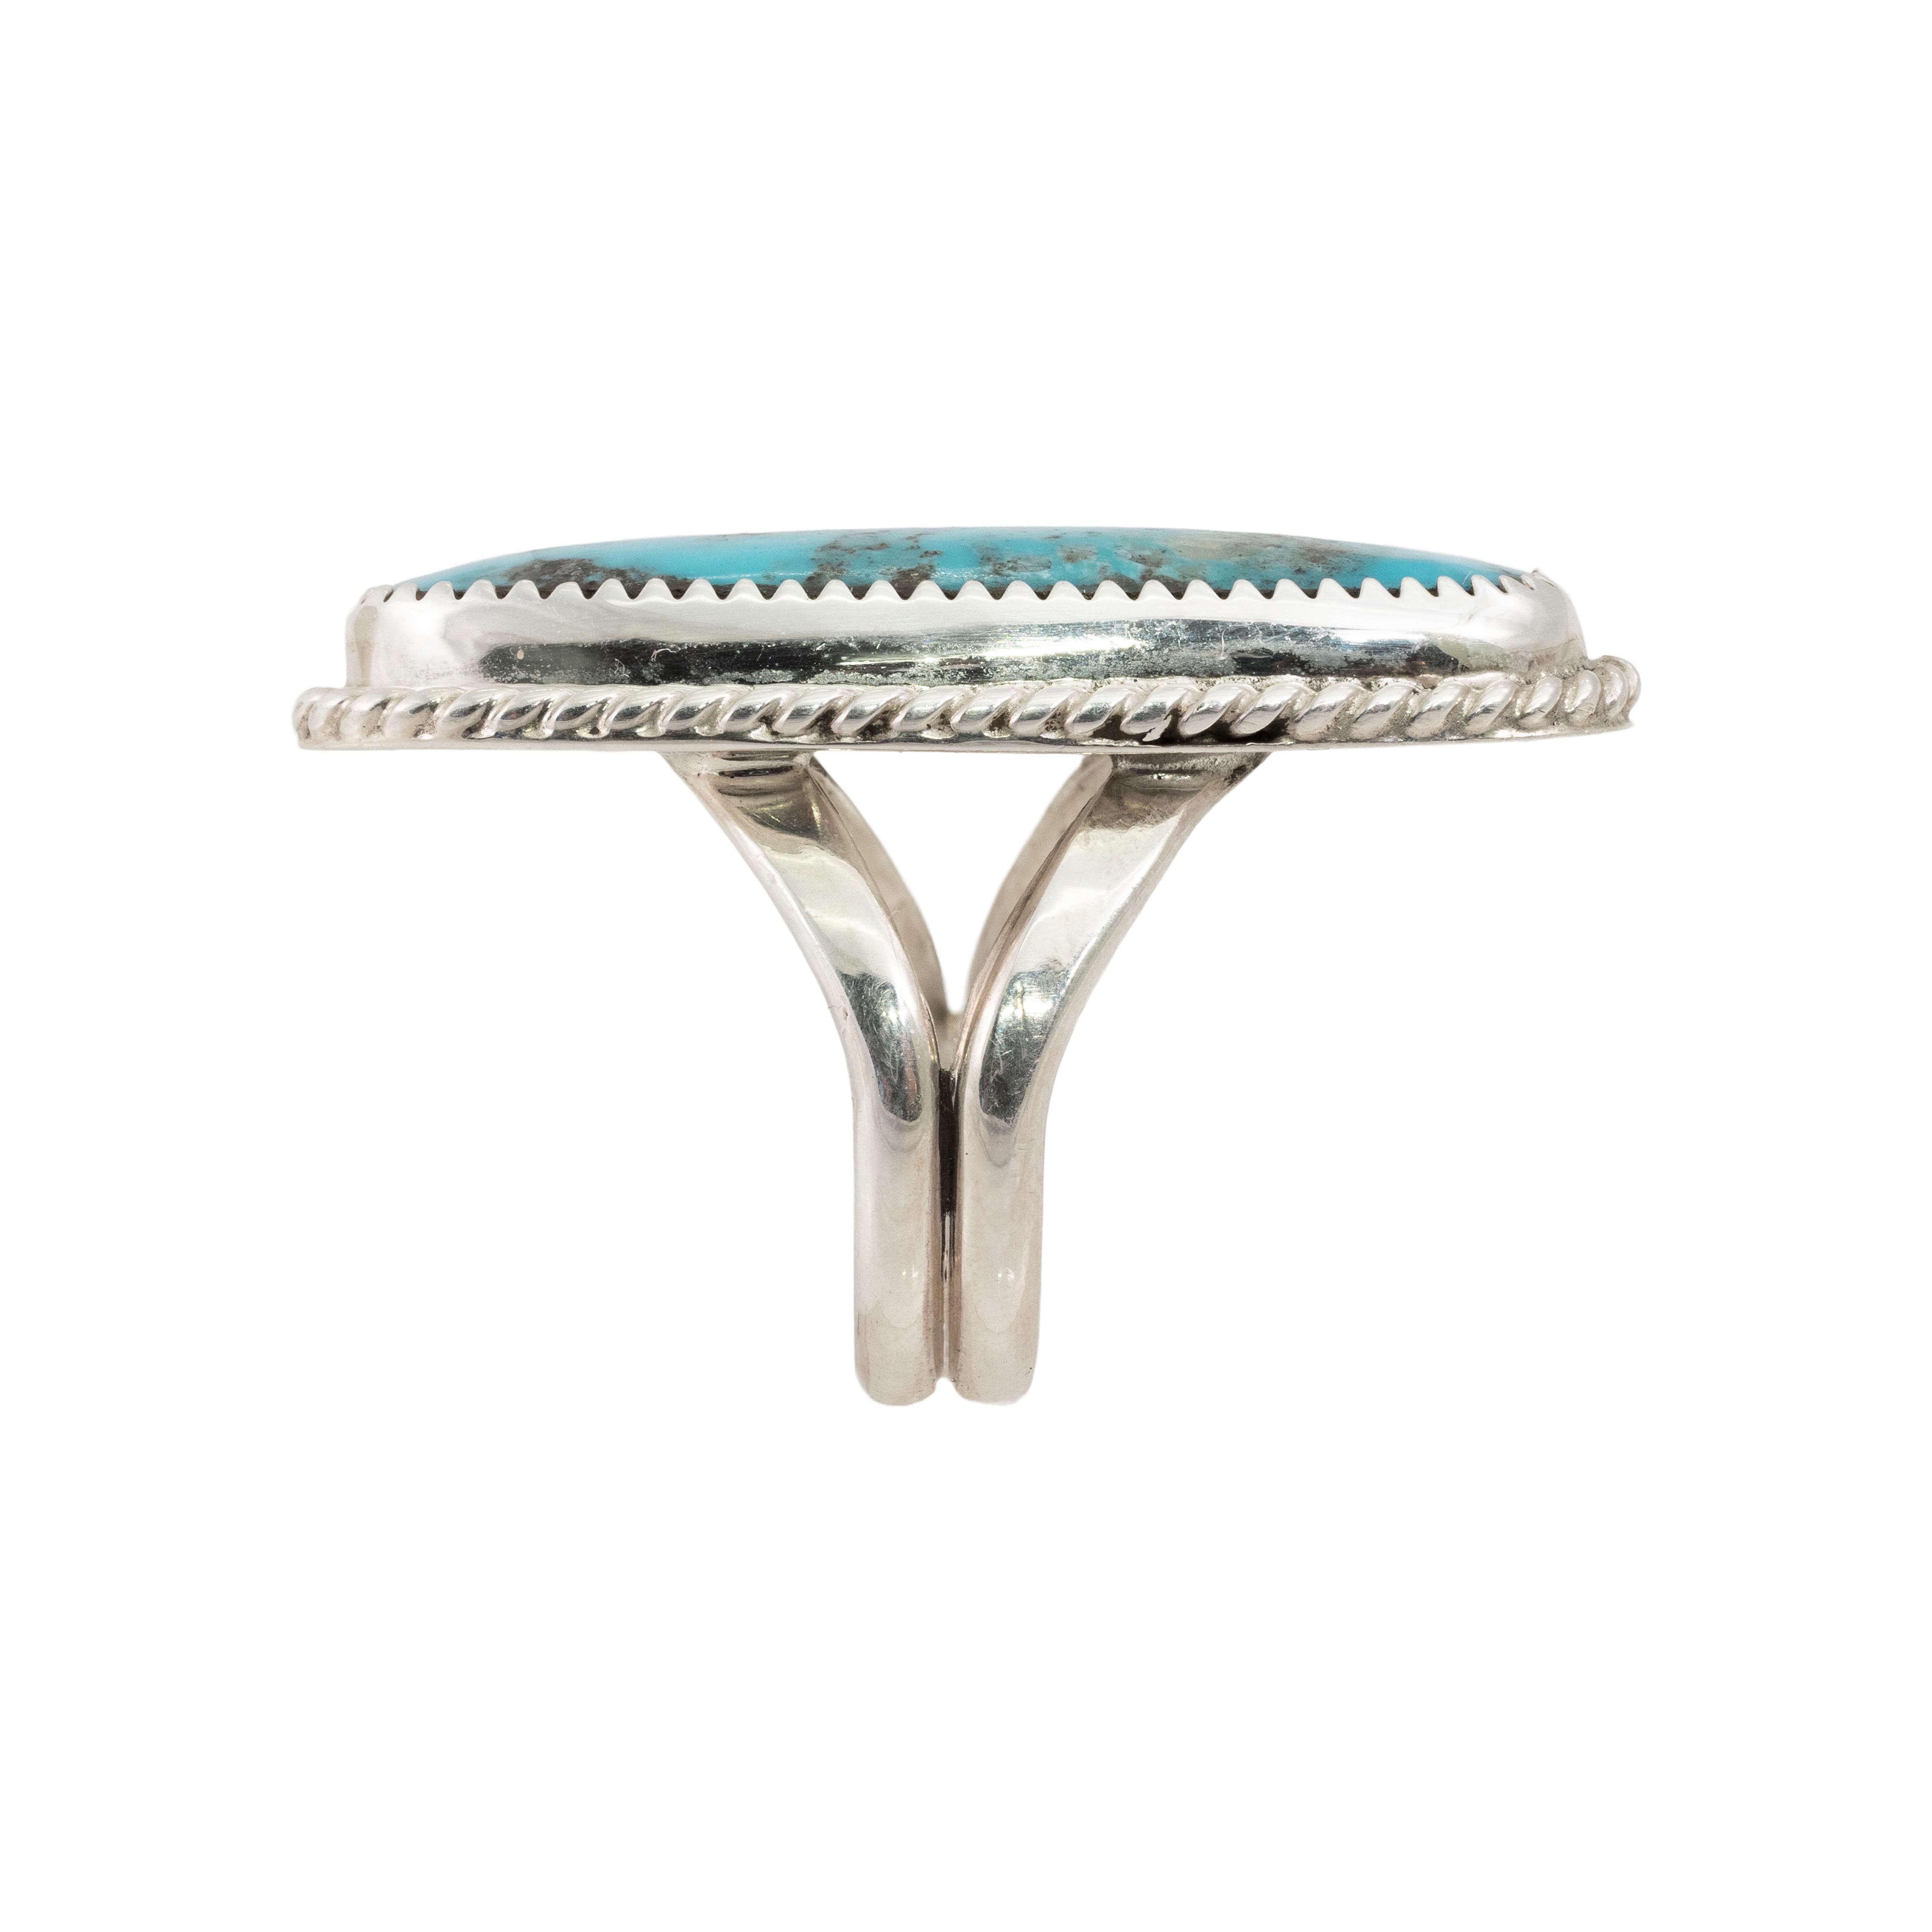 Navajo sterling silver and Triple Creek turquoise ring. The ring displays a sterling silver construction with turquoise set into the center. A large polished nugget of Triple Creek turquoise with a border of silver rope. The back of the piece is